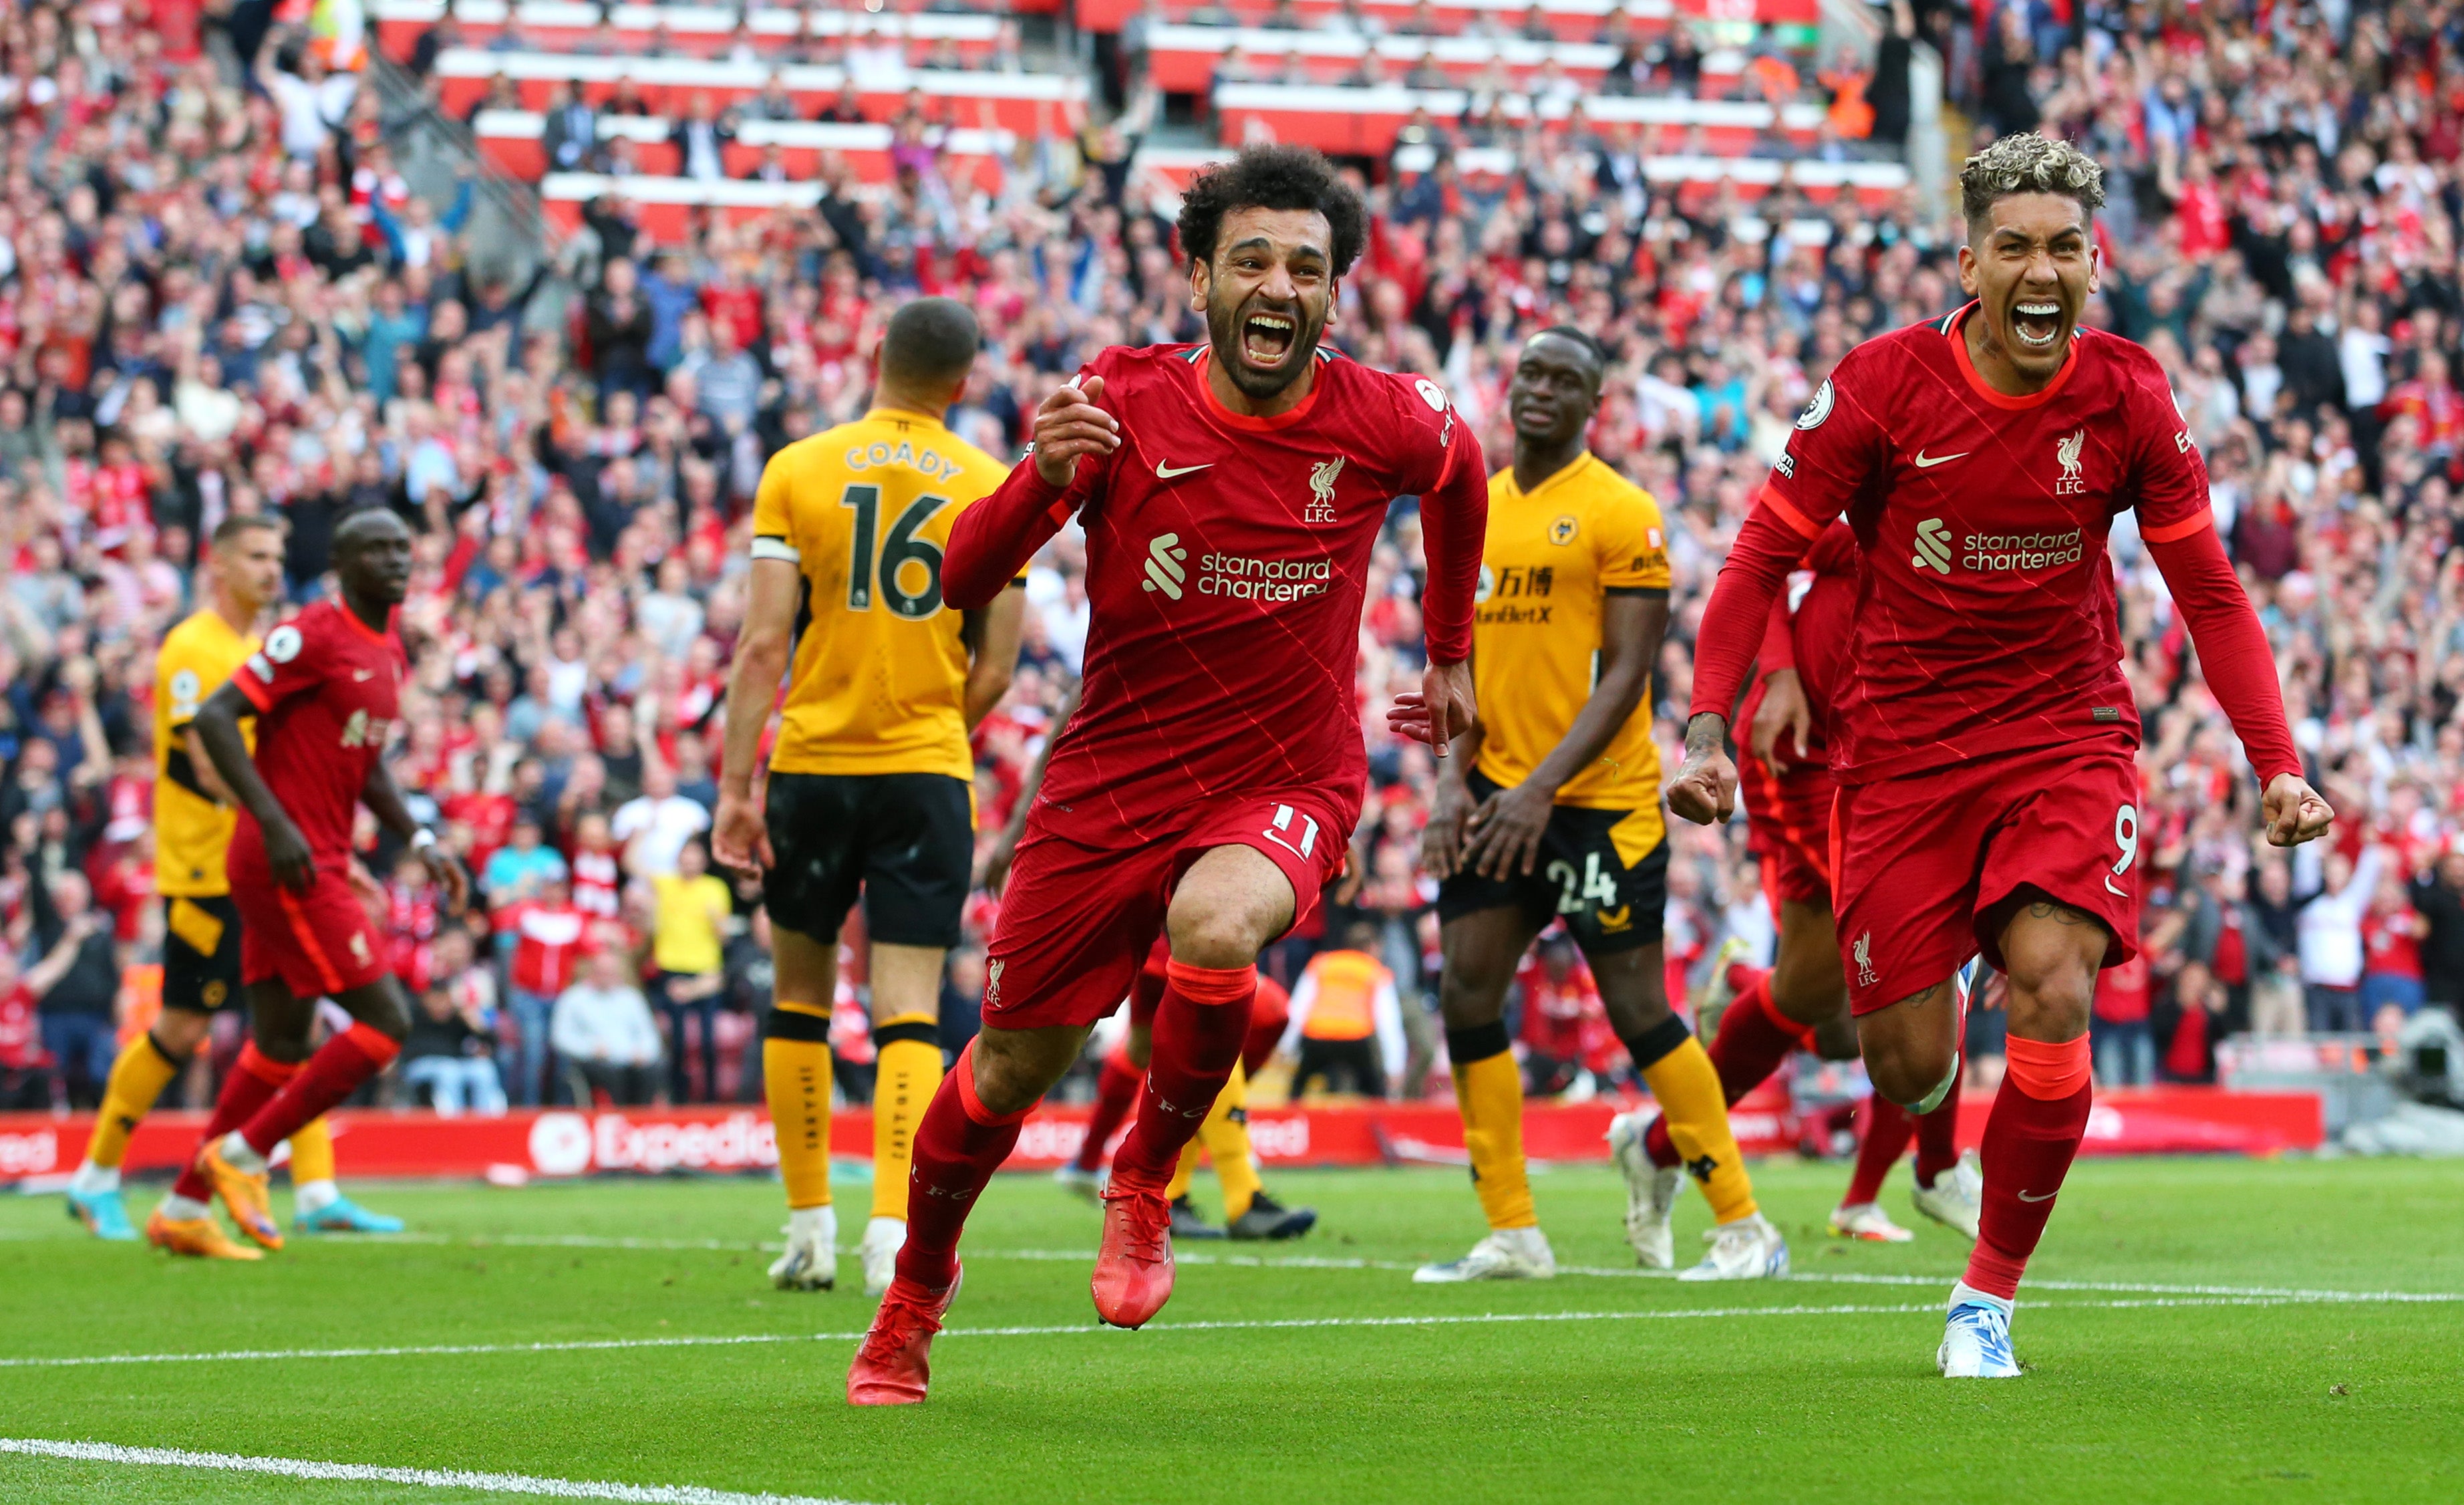 Mohamed Salah signed a new long-term contract with Liverpool